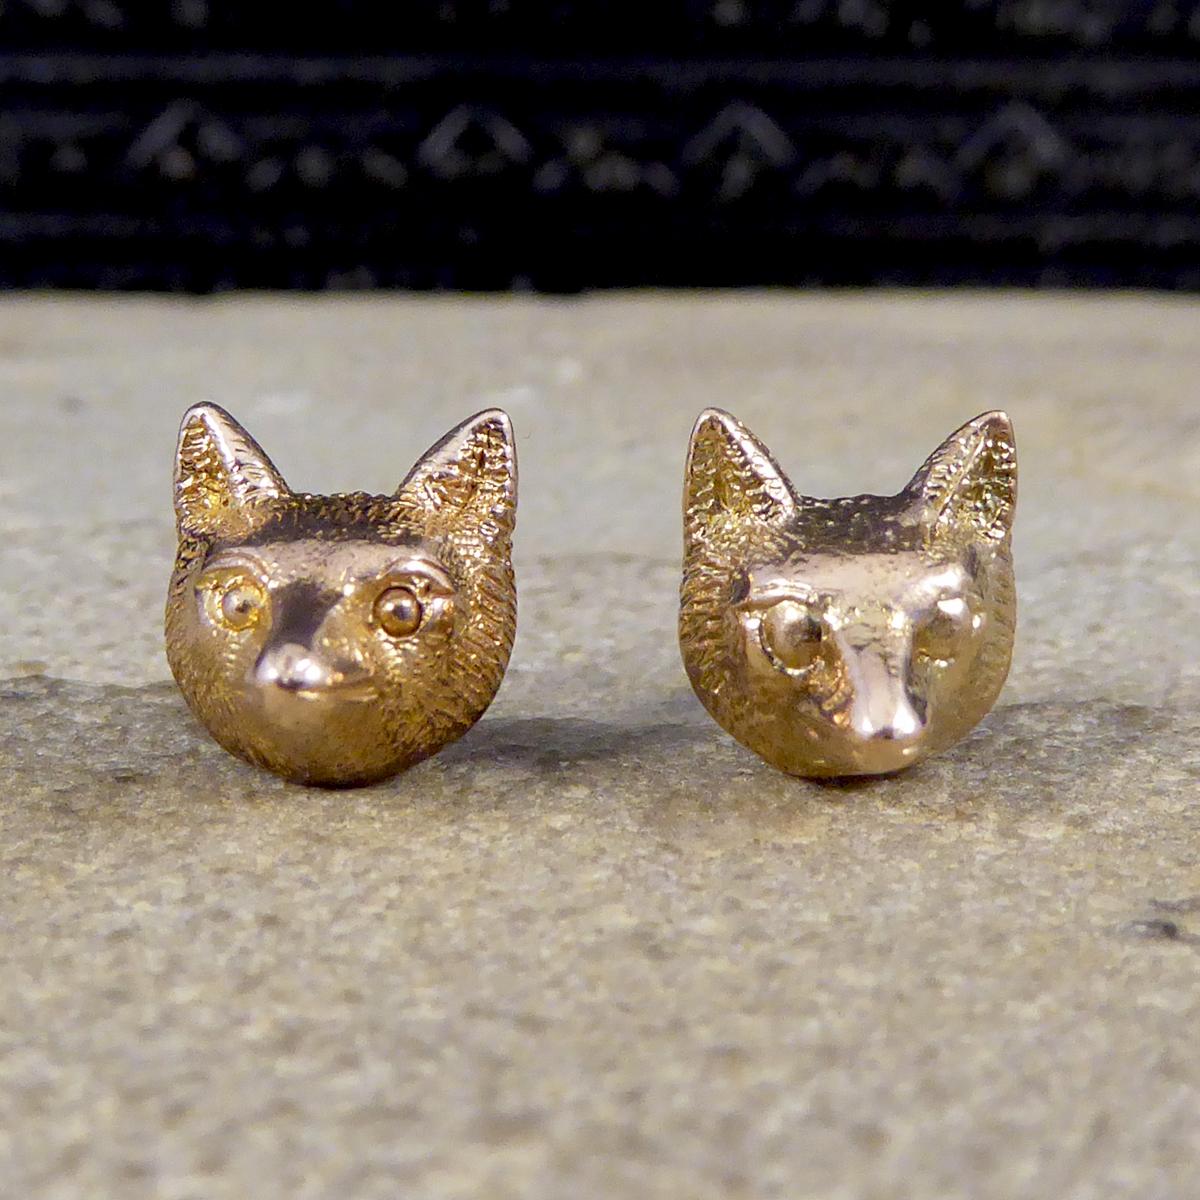 These cute vintage Fox head earrings have been crafted in 9ct rose gold. Each earring has a different and unique stem as one sits slightly shorter than the other but both go through the ear and are held securely with a butterfly back.

Condition: